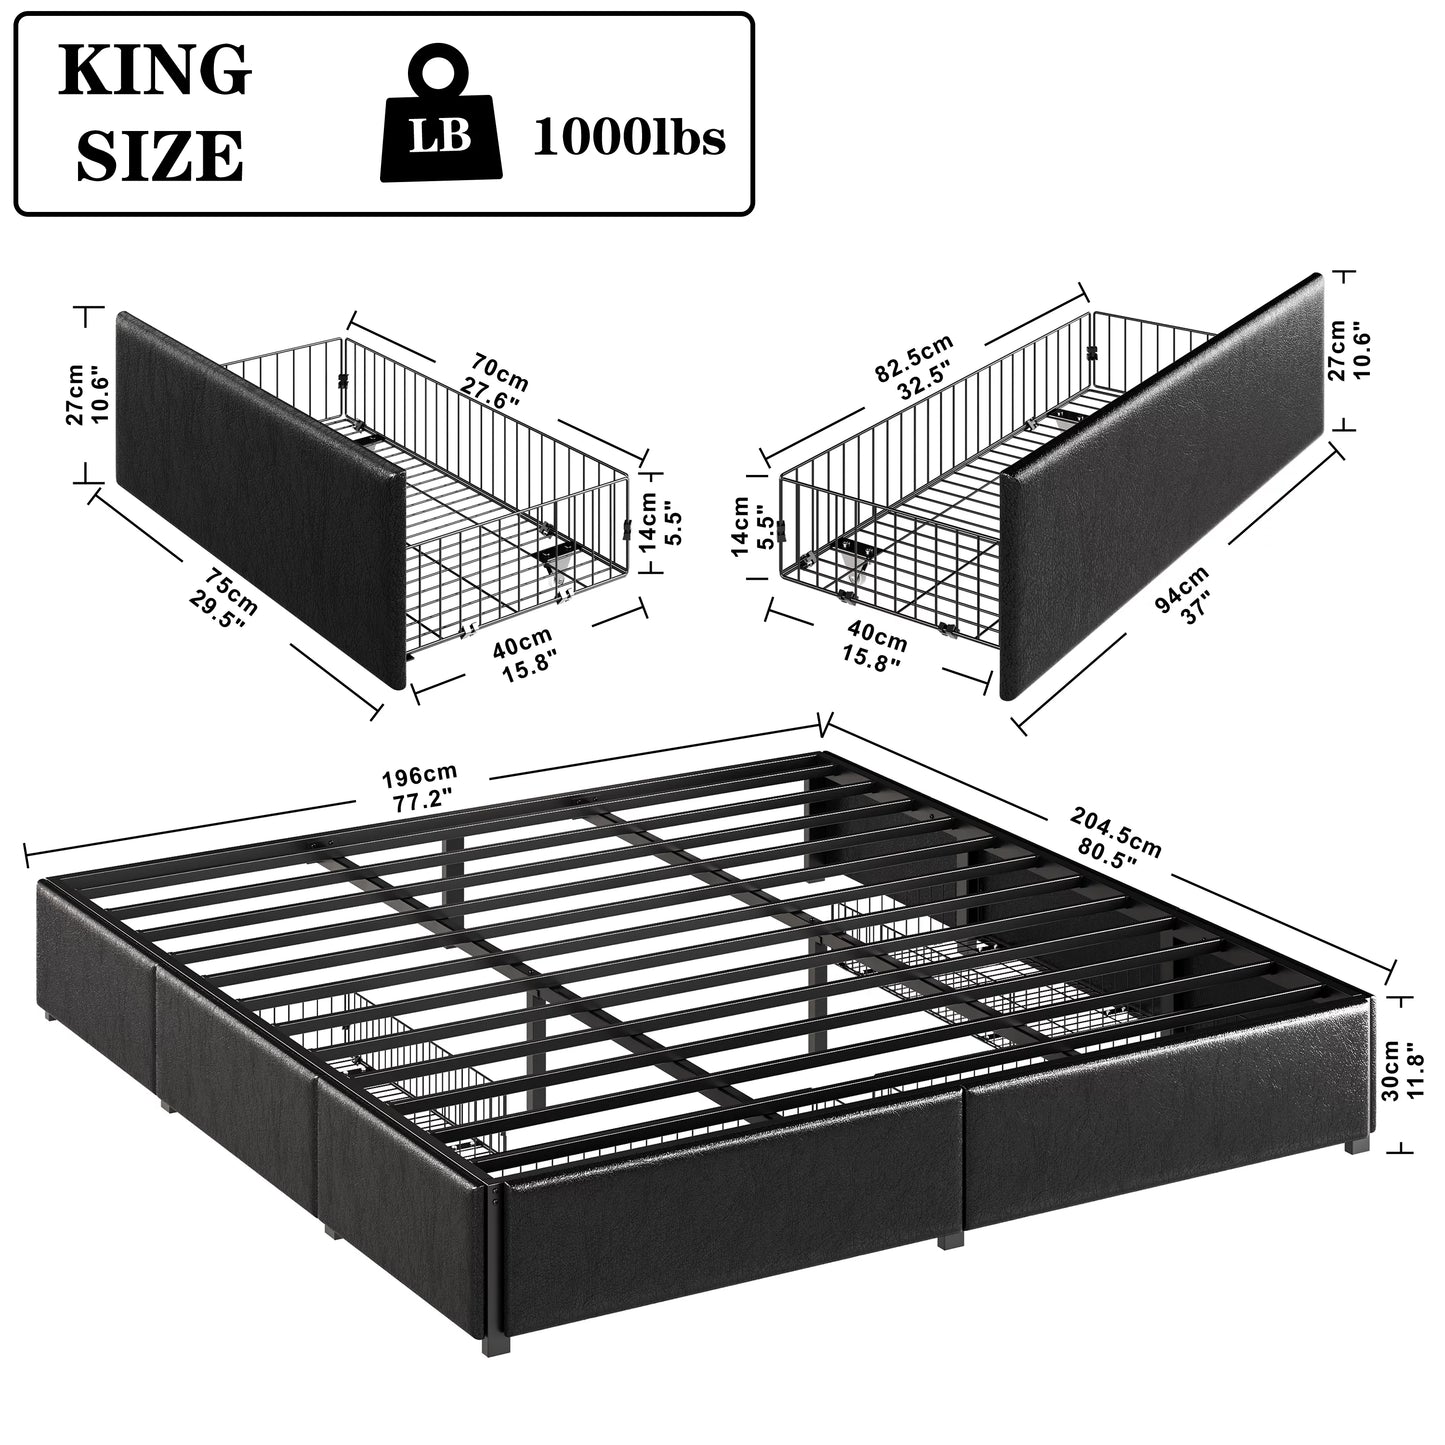 ANCTOR King Bed Frame with 4 Drawers, Upholstered Platform Bed, Bed with Storage No Box Spring Needed,Metal Slats Support, Easy Assembly